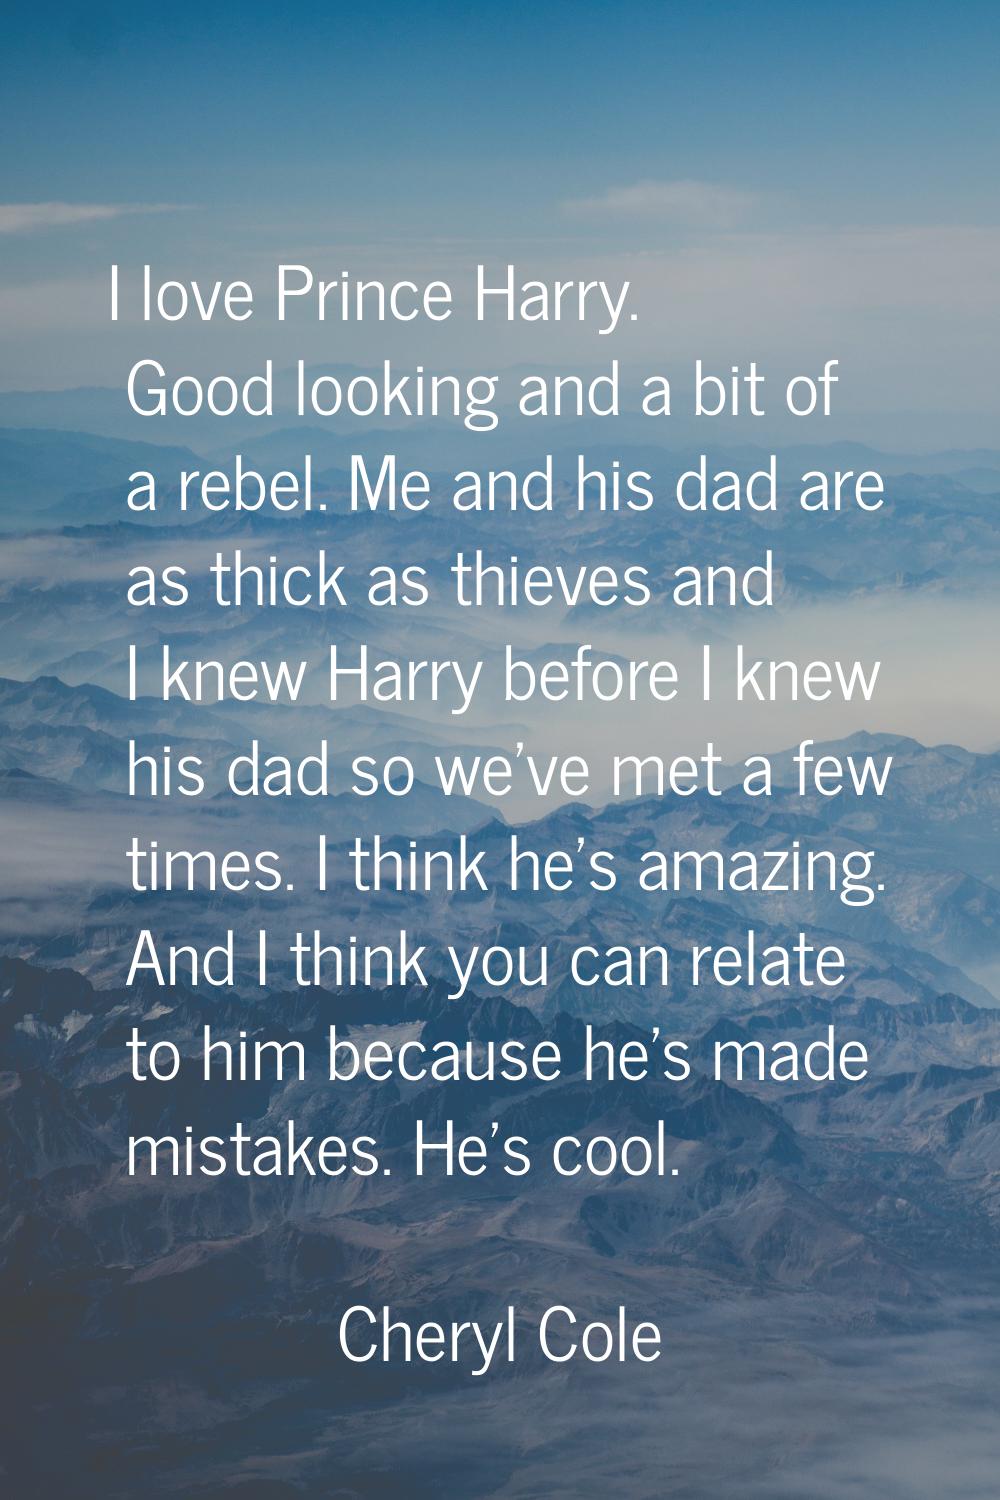 I love Prince Harry. Good looking and a bit of a rebel. Me and his dad are as thick as thieves and 